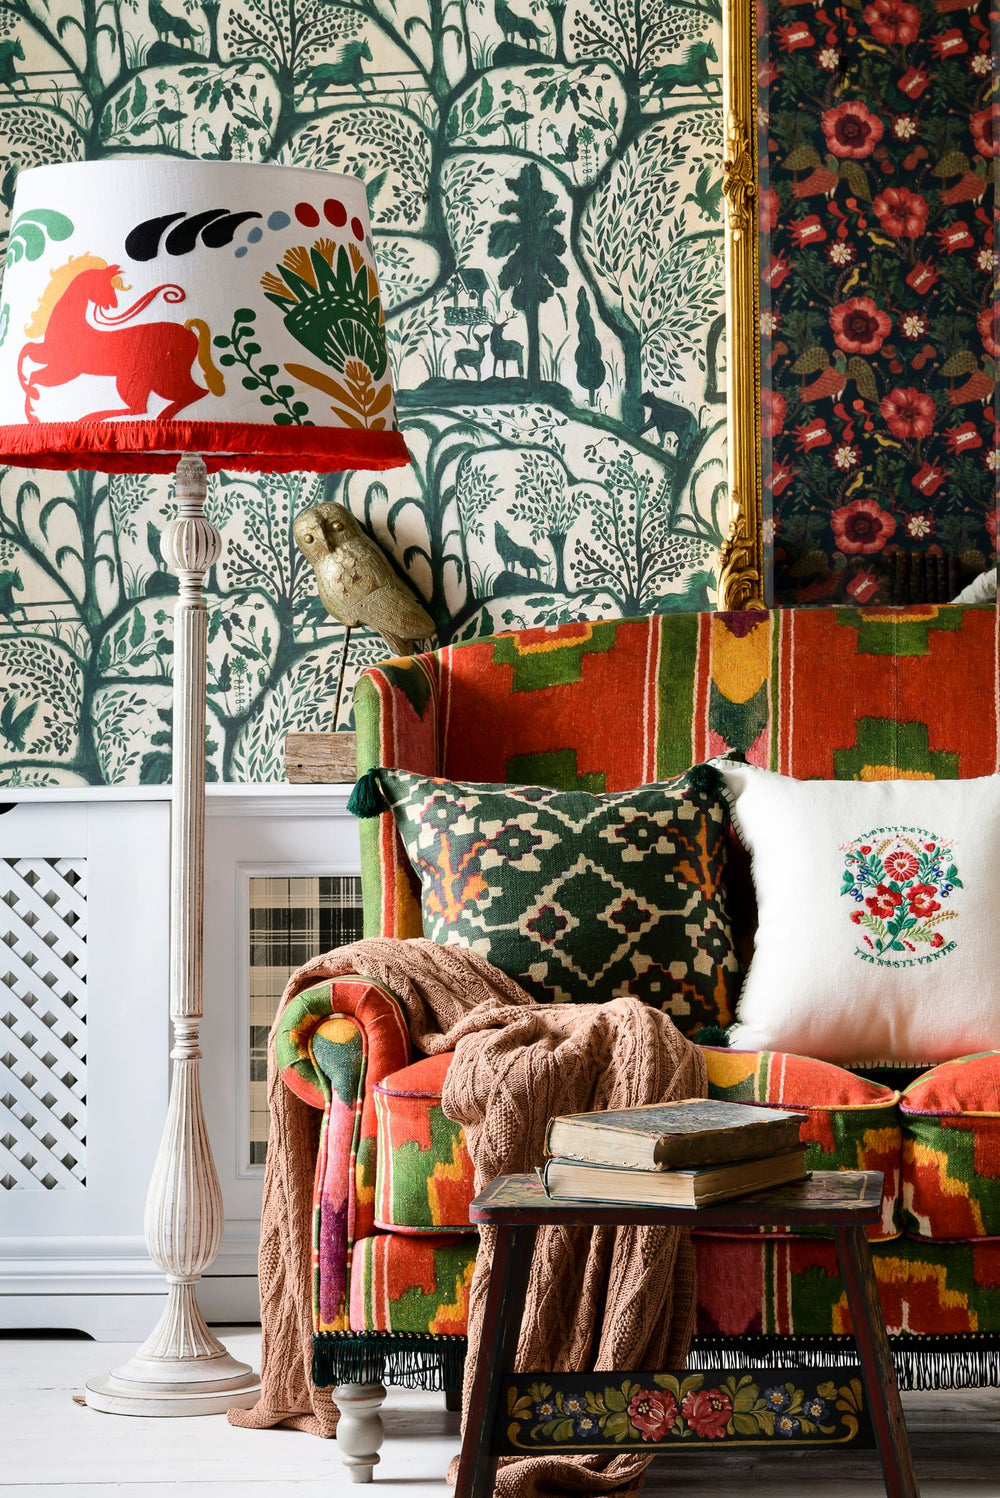 embroidered cone lampshade horse and flowers folk design red white and green with fringe room set floor lamp sofa